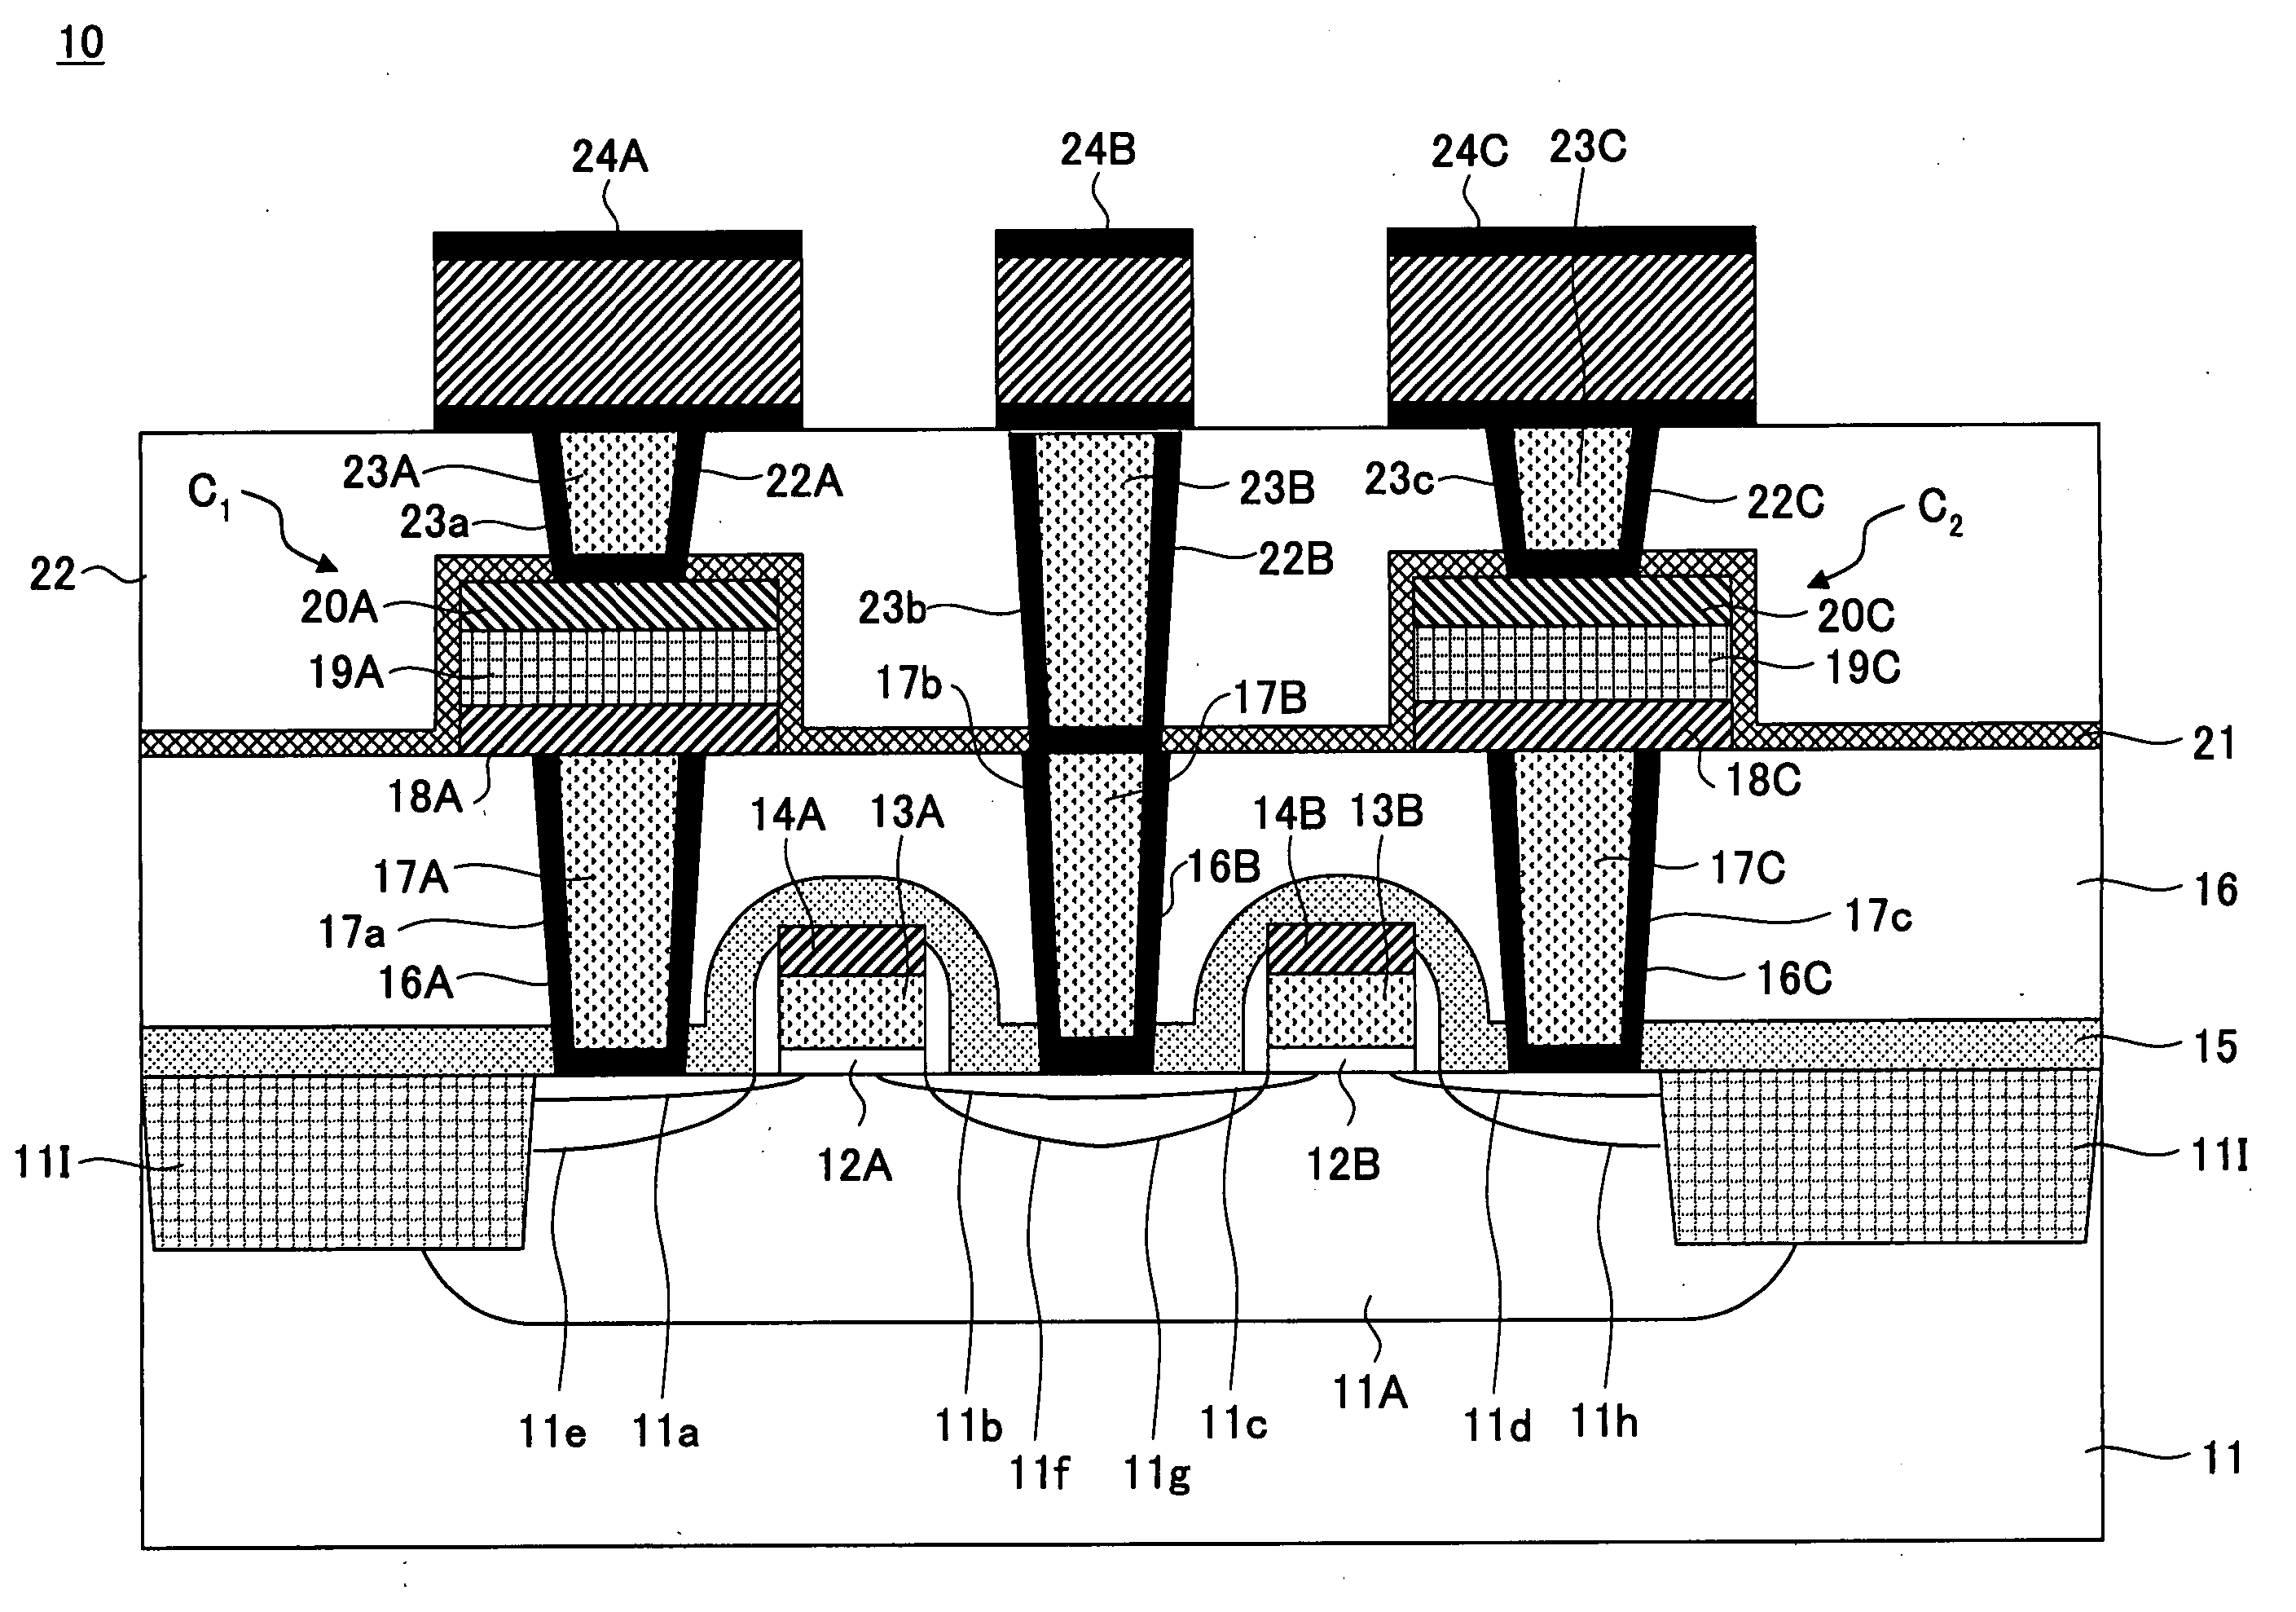 Ferroelectric memory device and fabrication process thereof, fabrication process of a semiconductor device